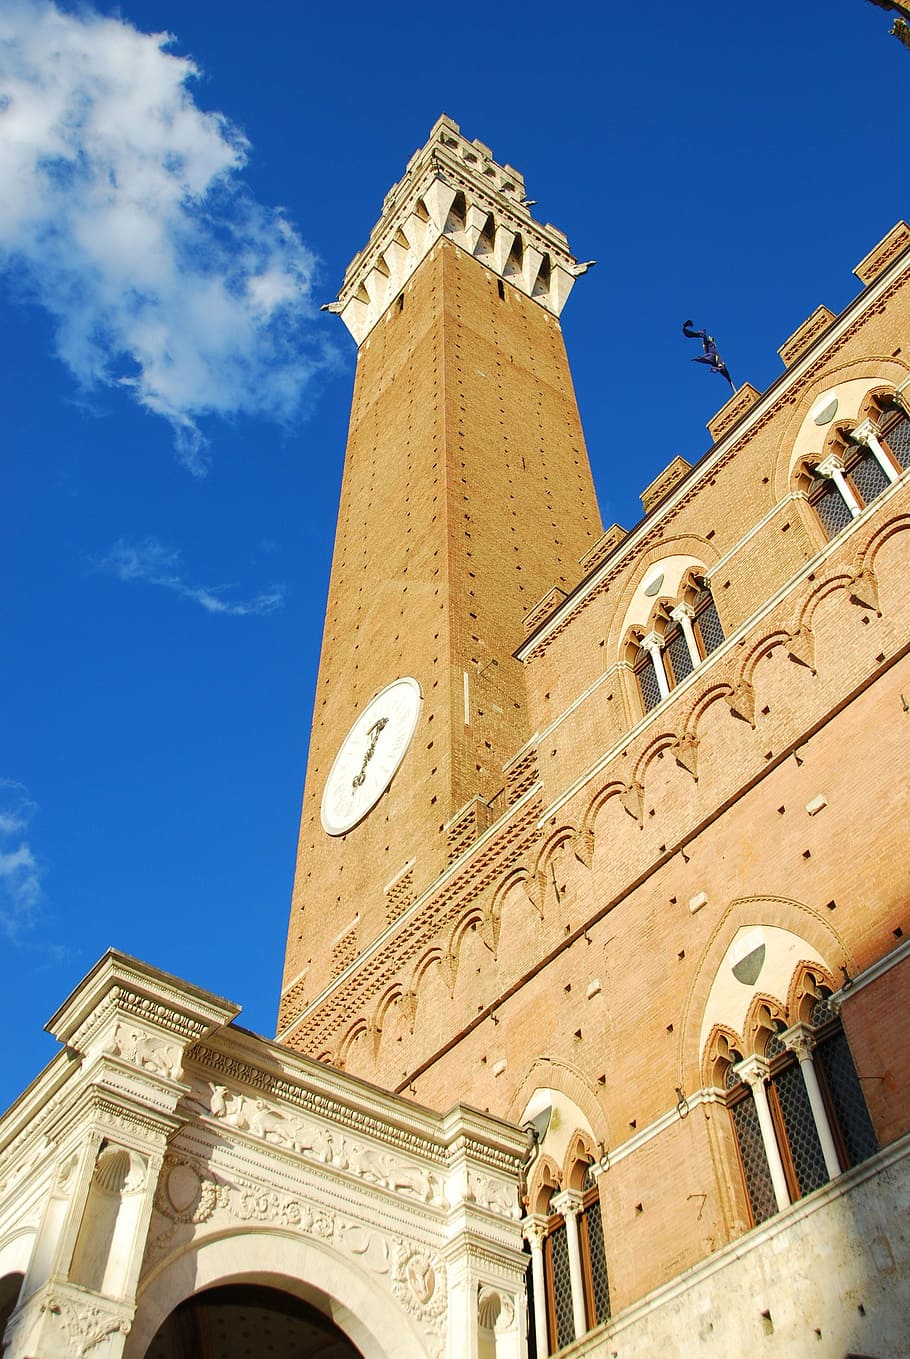 siena, square of the field, tower eats, torre, tuscany, italy, sky, blue, clouds, sun